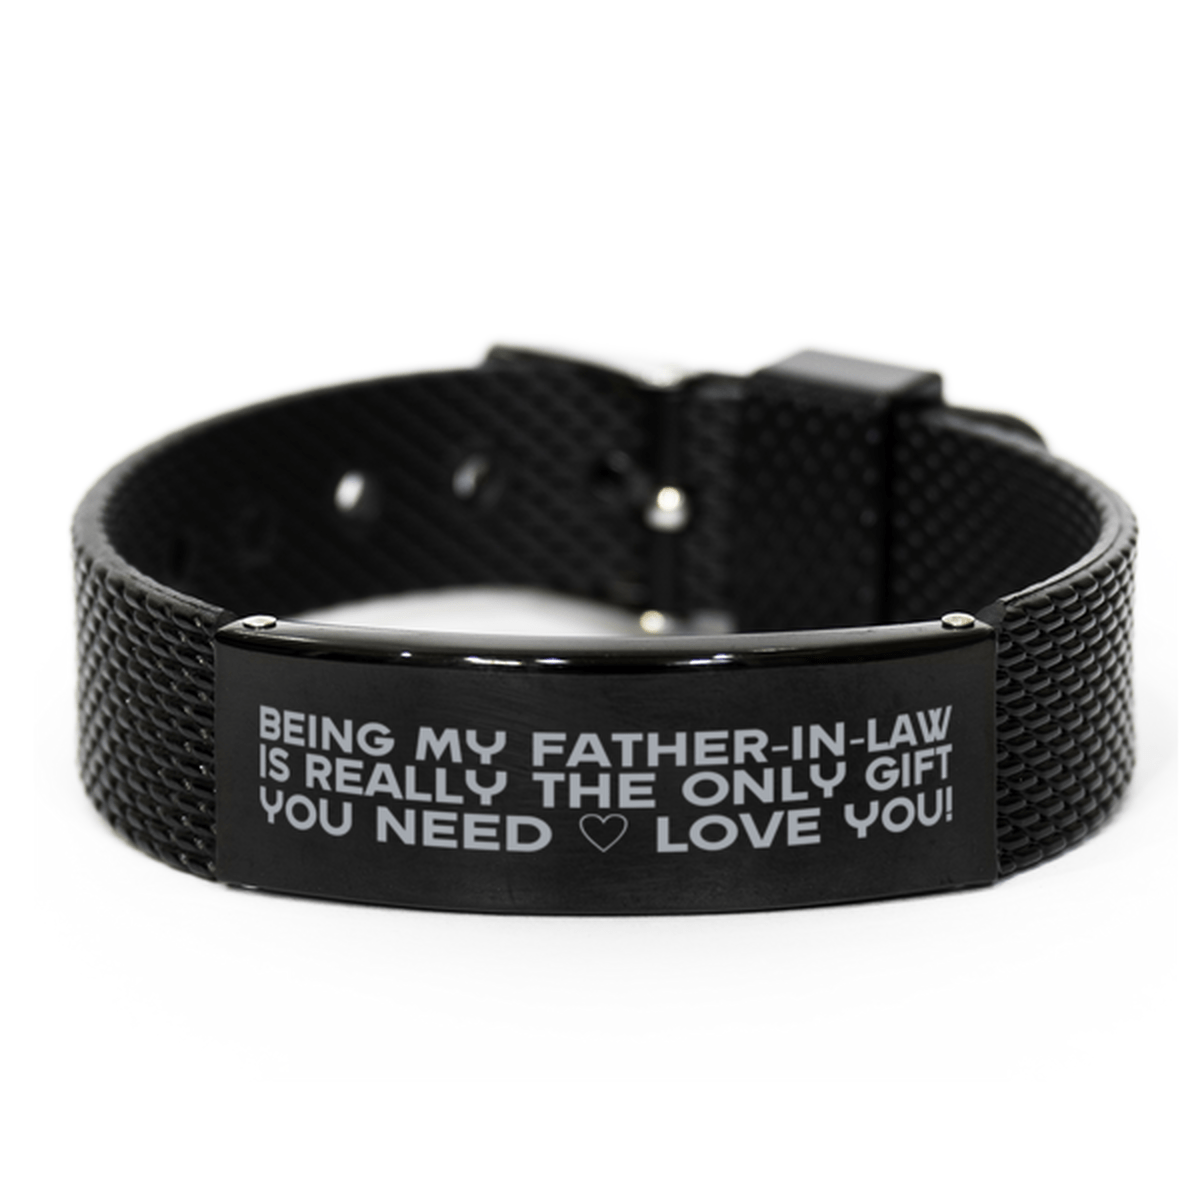 Funny Father-in-law Black Shark Mesh Bracelet, Being My Father-in-law Is Really the Only Gift You Need, Best Birthday Gifts for Father-in-law